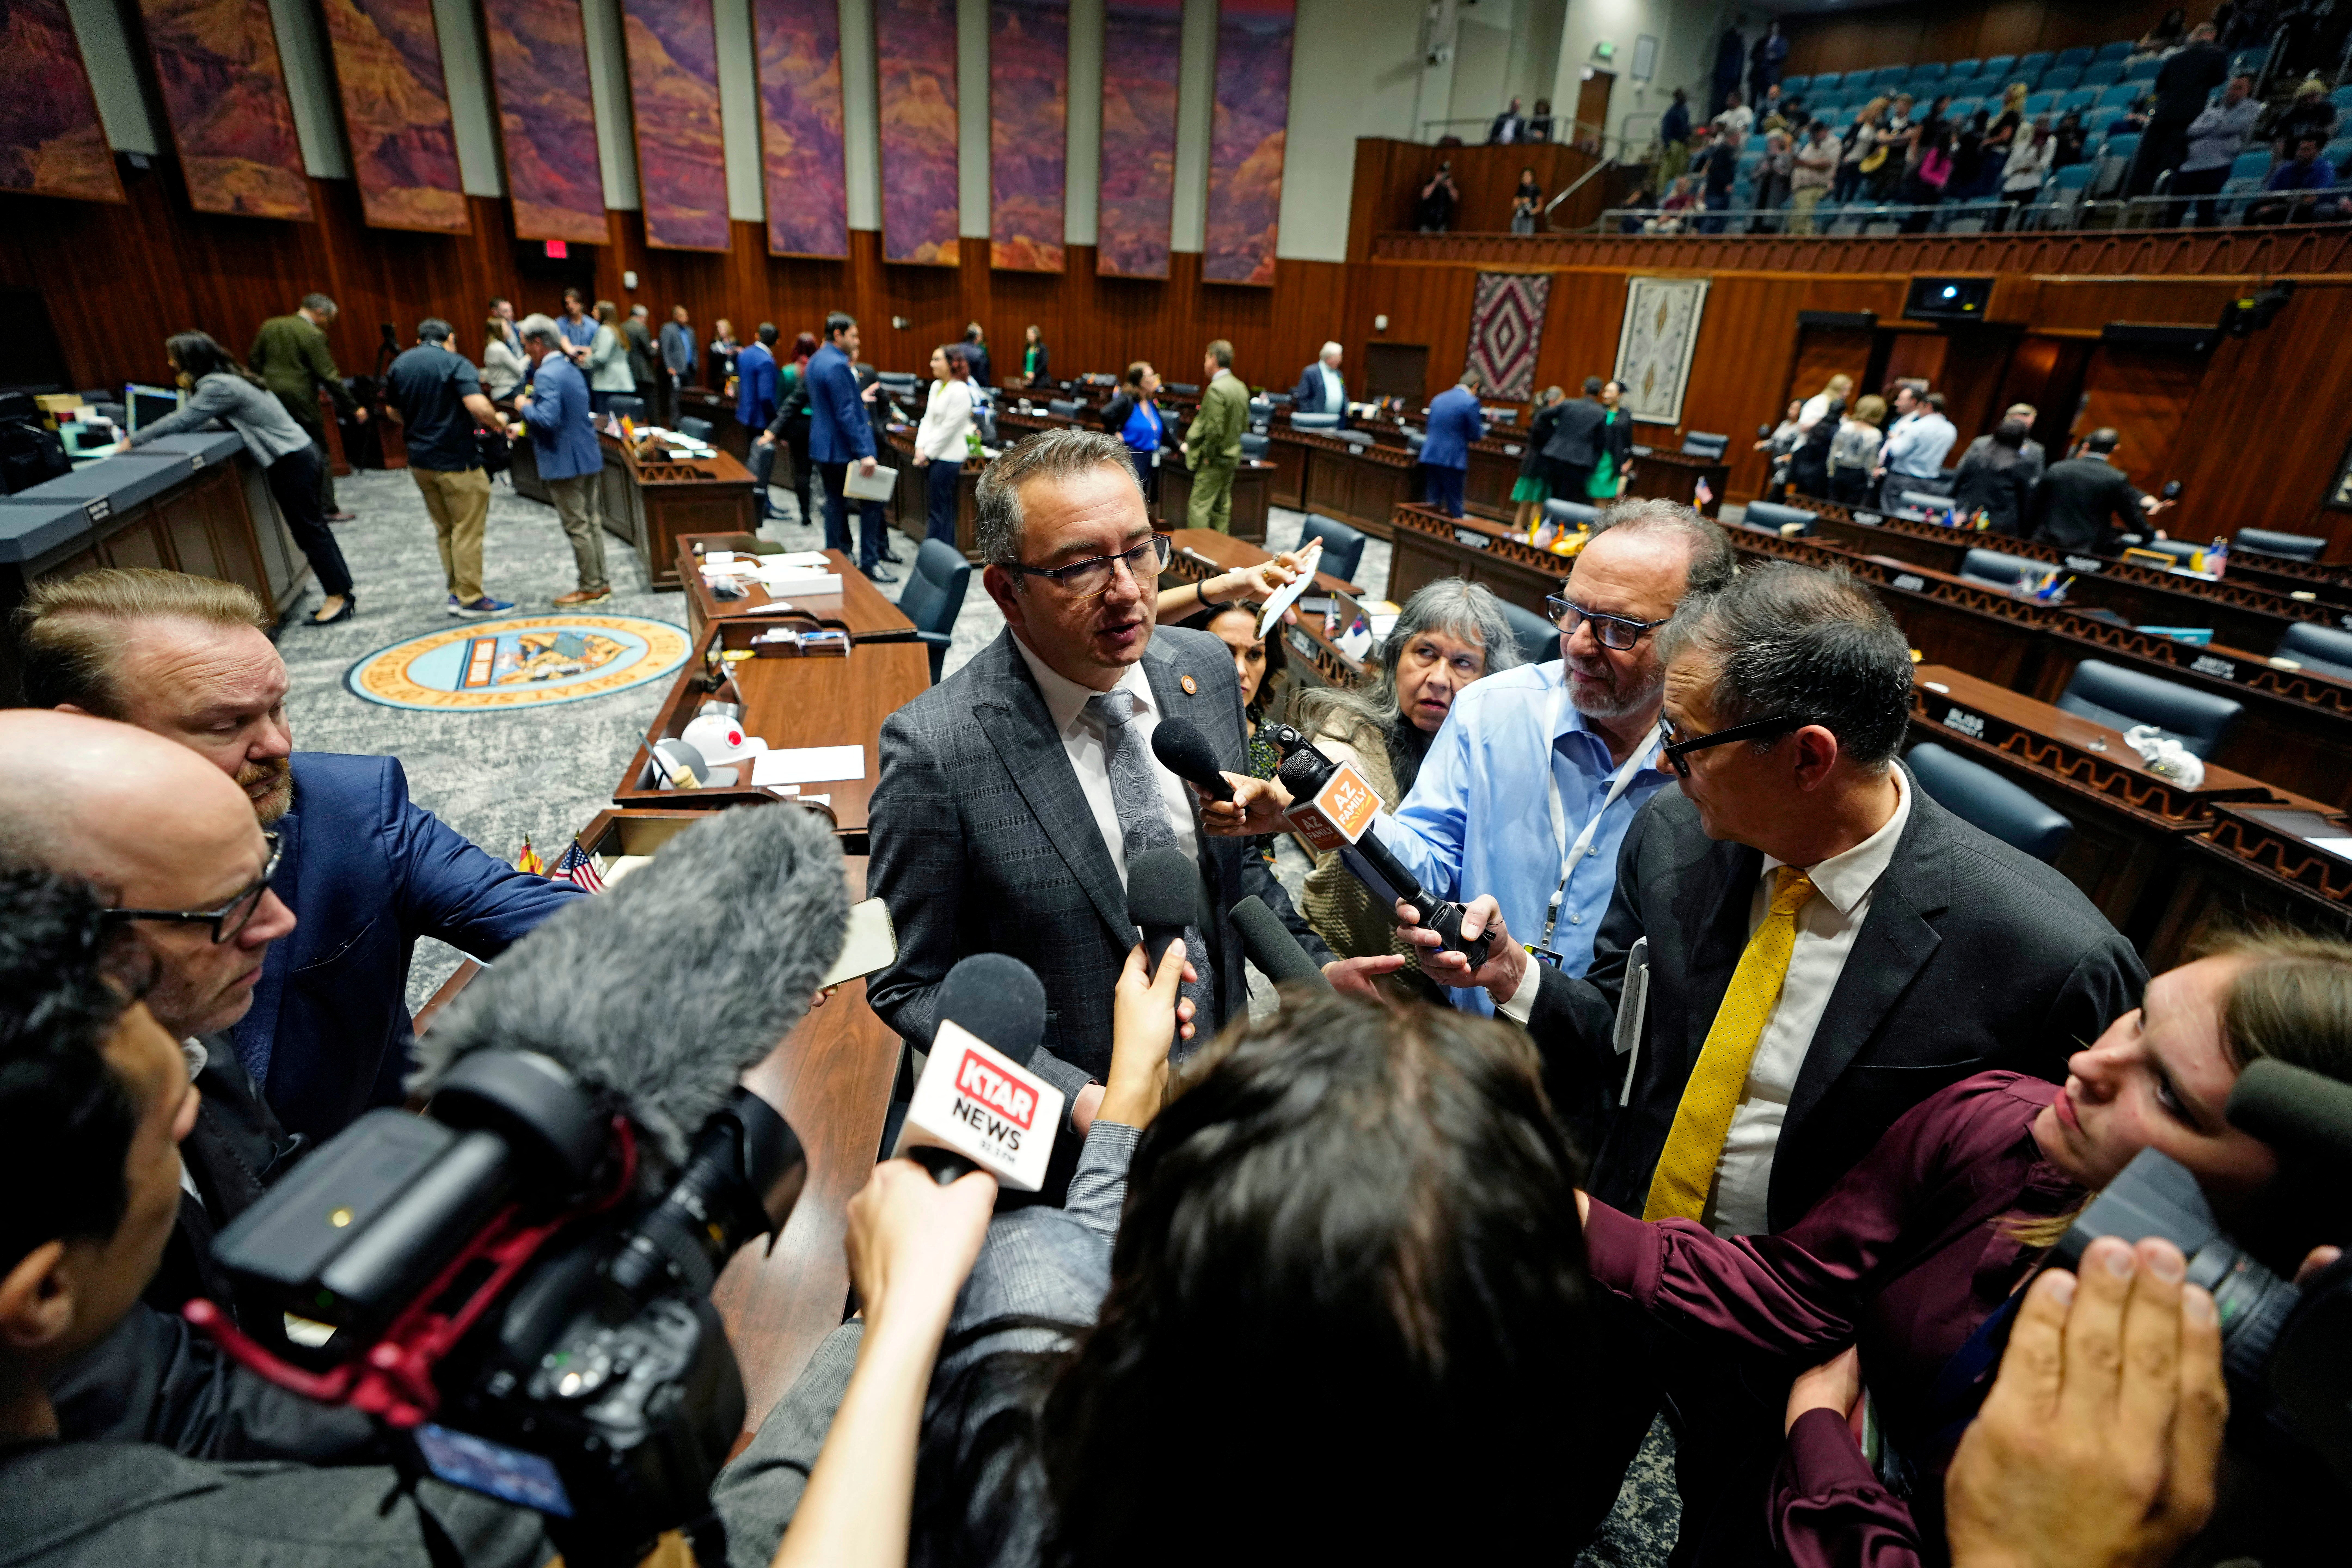 Speaker of the Arizona state House Ben Toma speaks to the news media after Republicans blocked the procedural vote to fast-track a repeal of the 1864 abortion ban